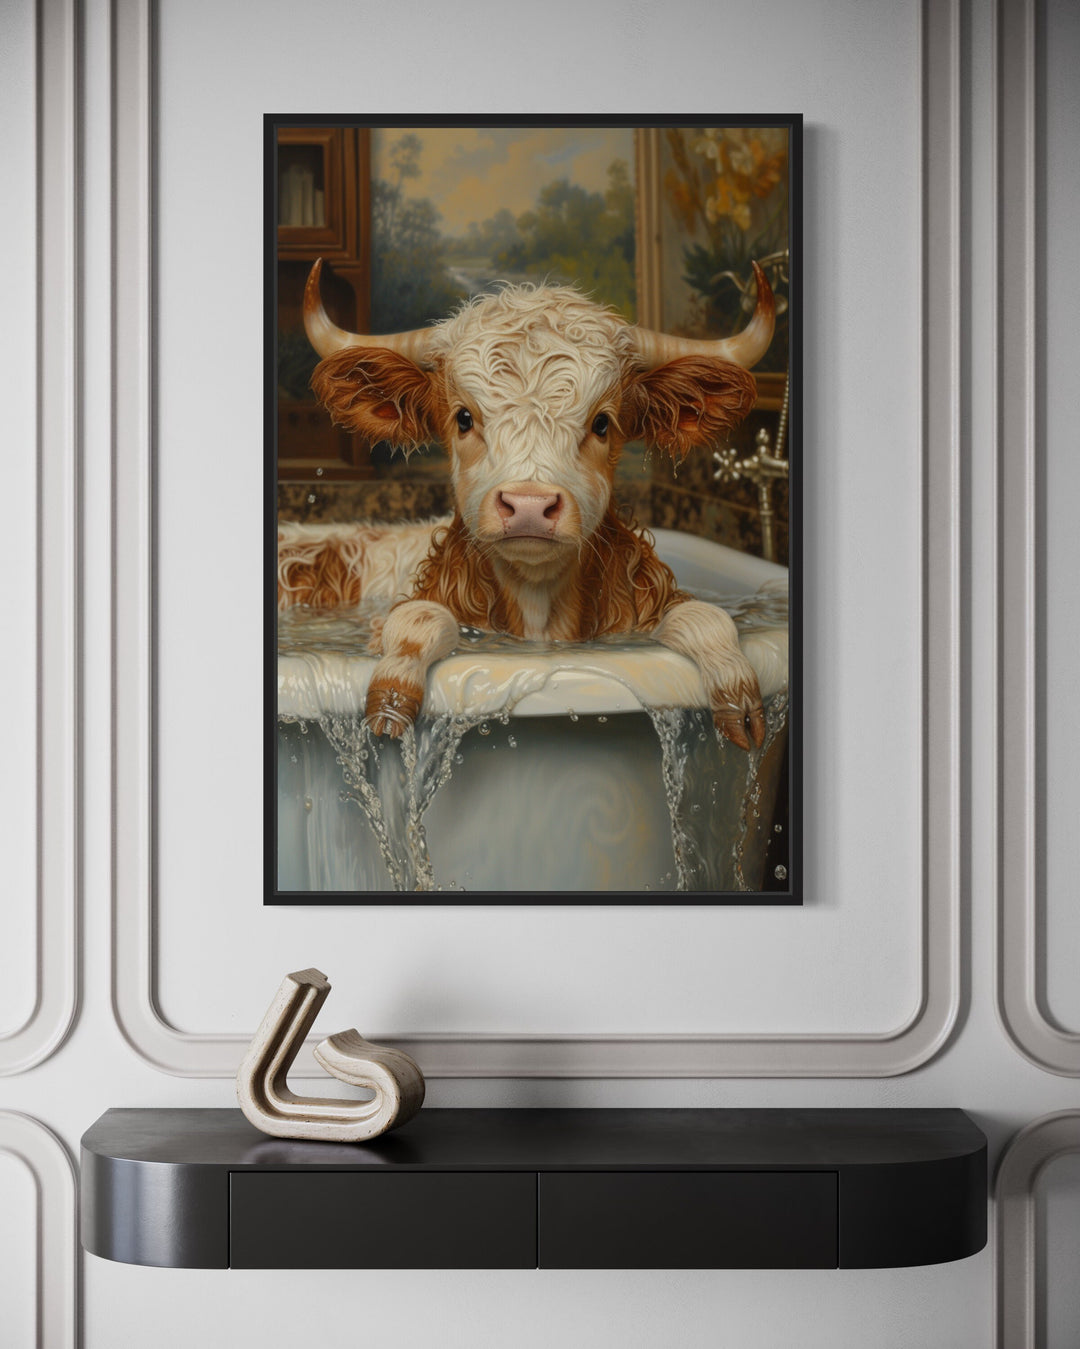 Baby Highland Cow In The Bath Tub Framed Canvas Wall Art close up